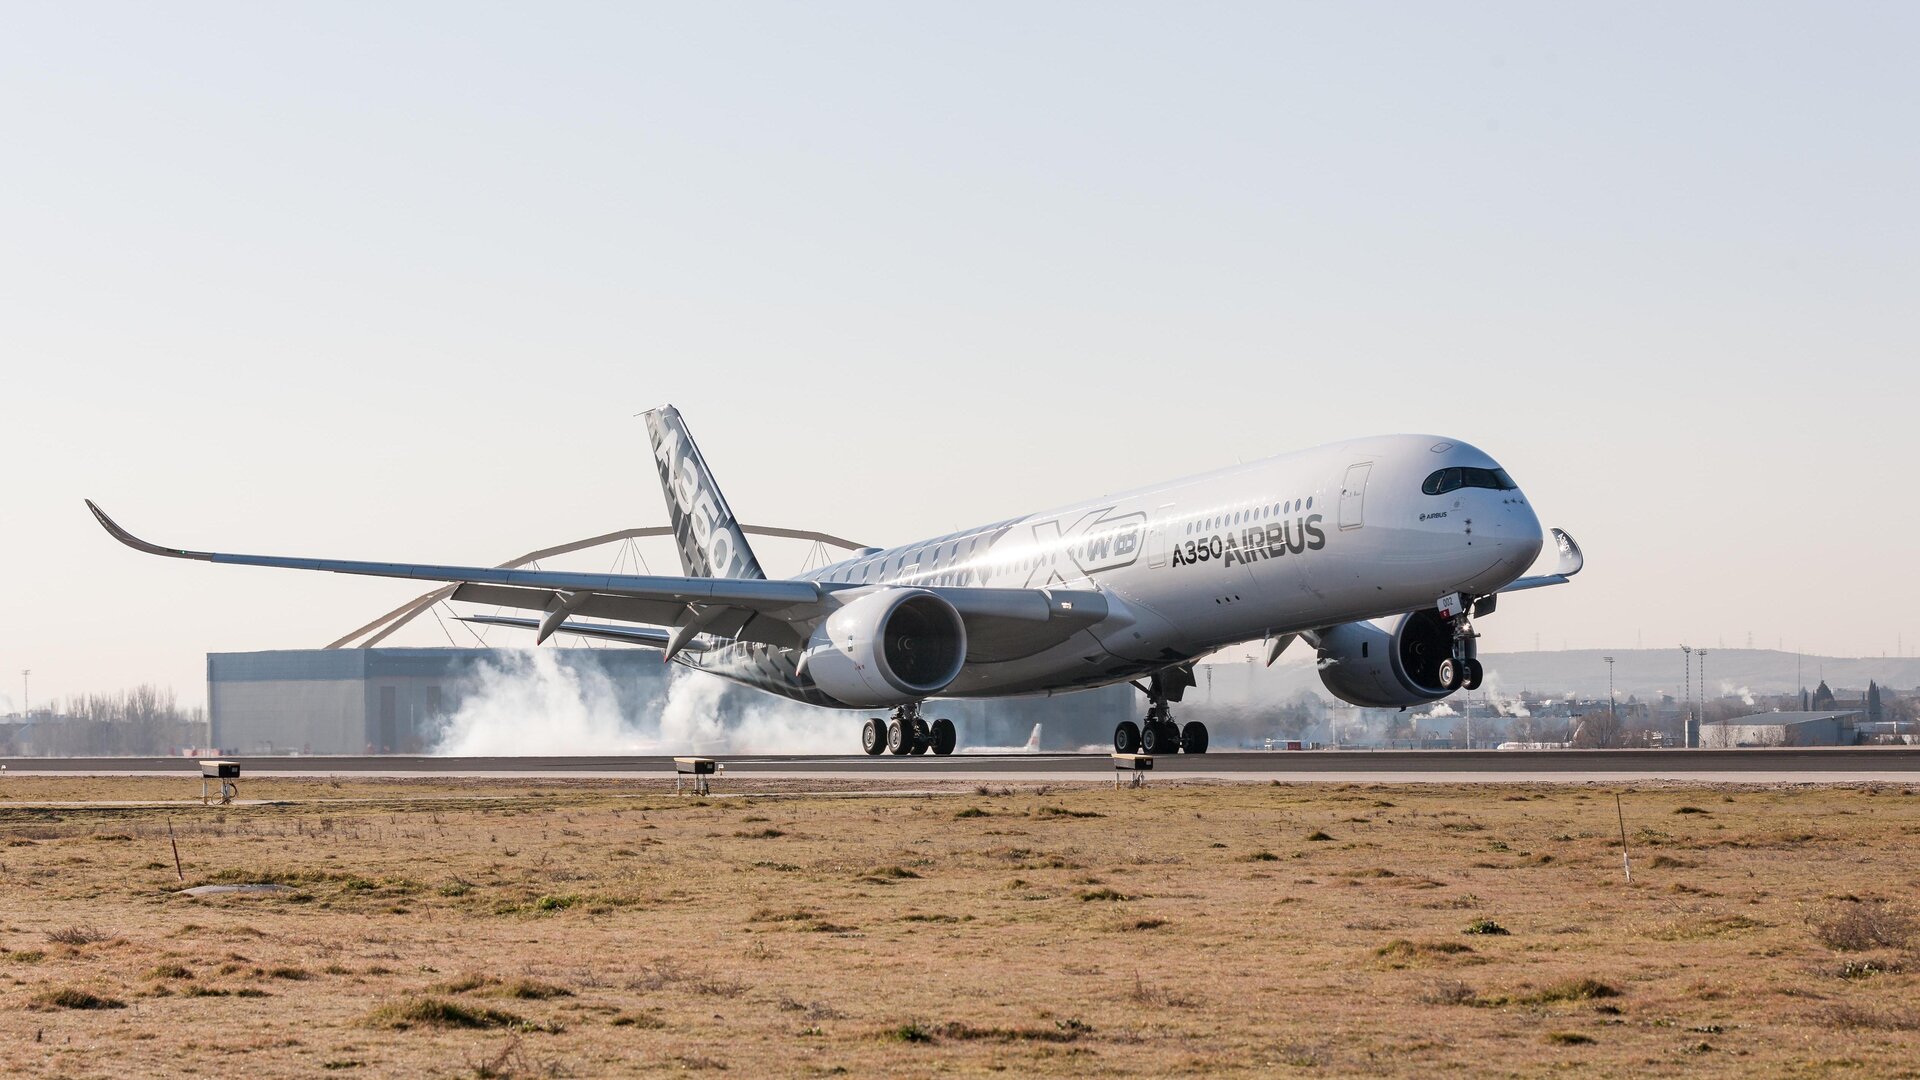 New Airbus A350 comes EGNOS-capable